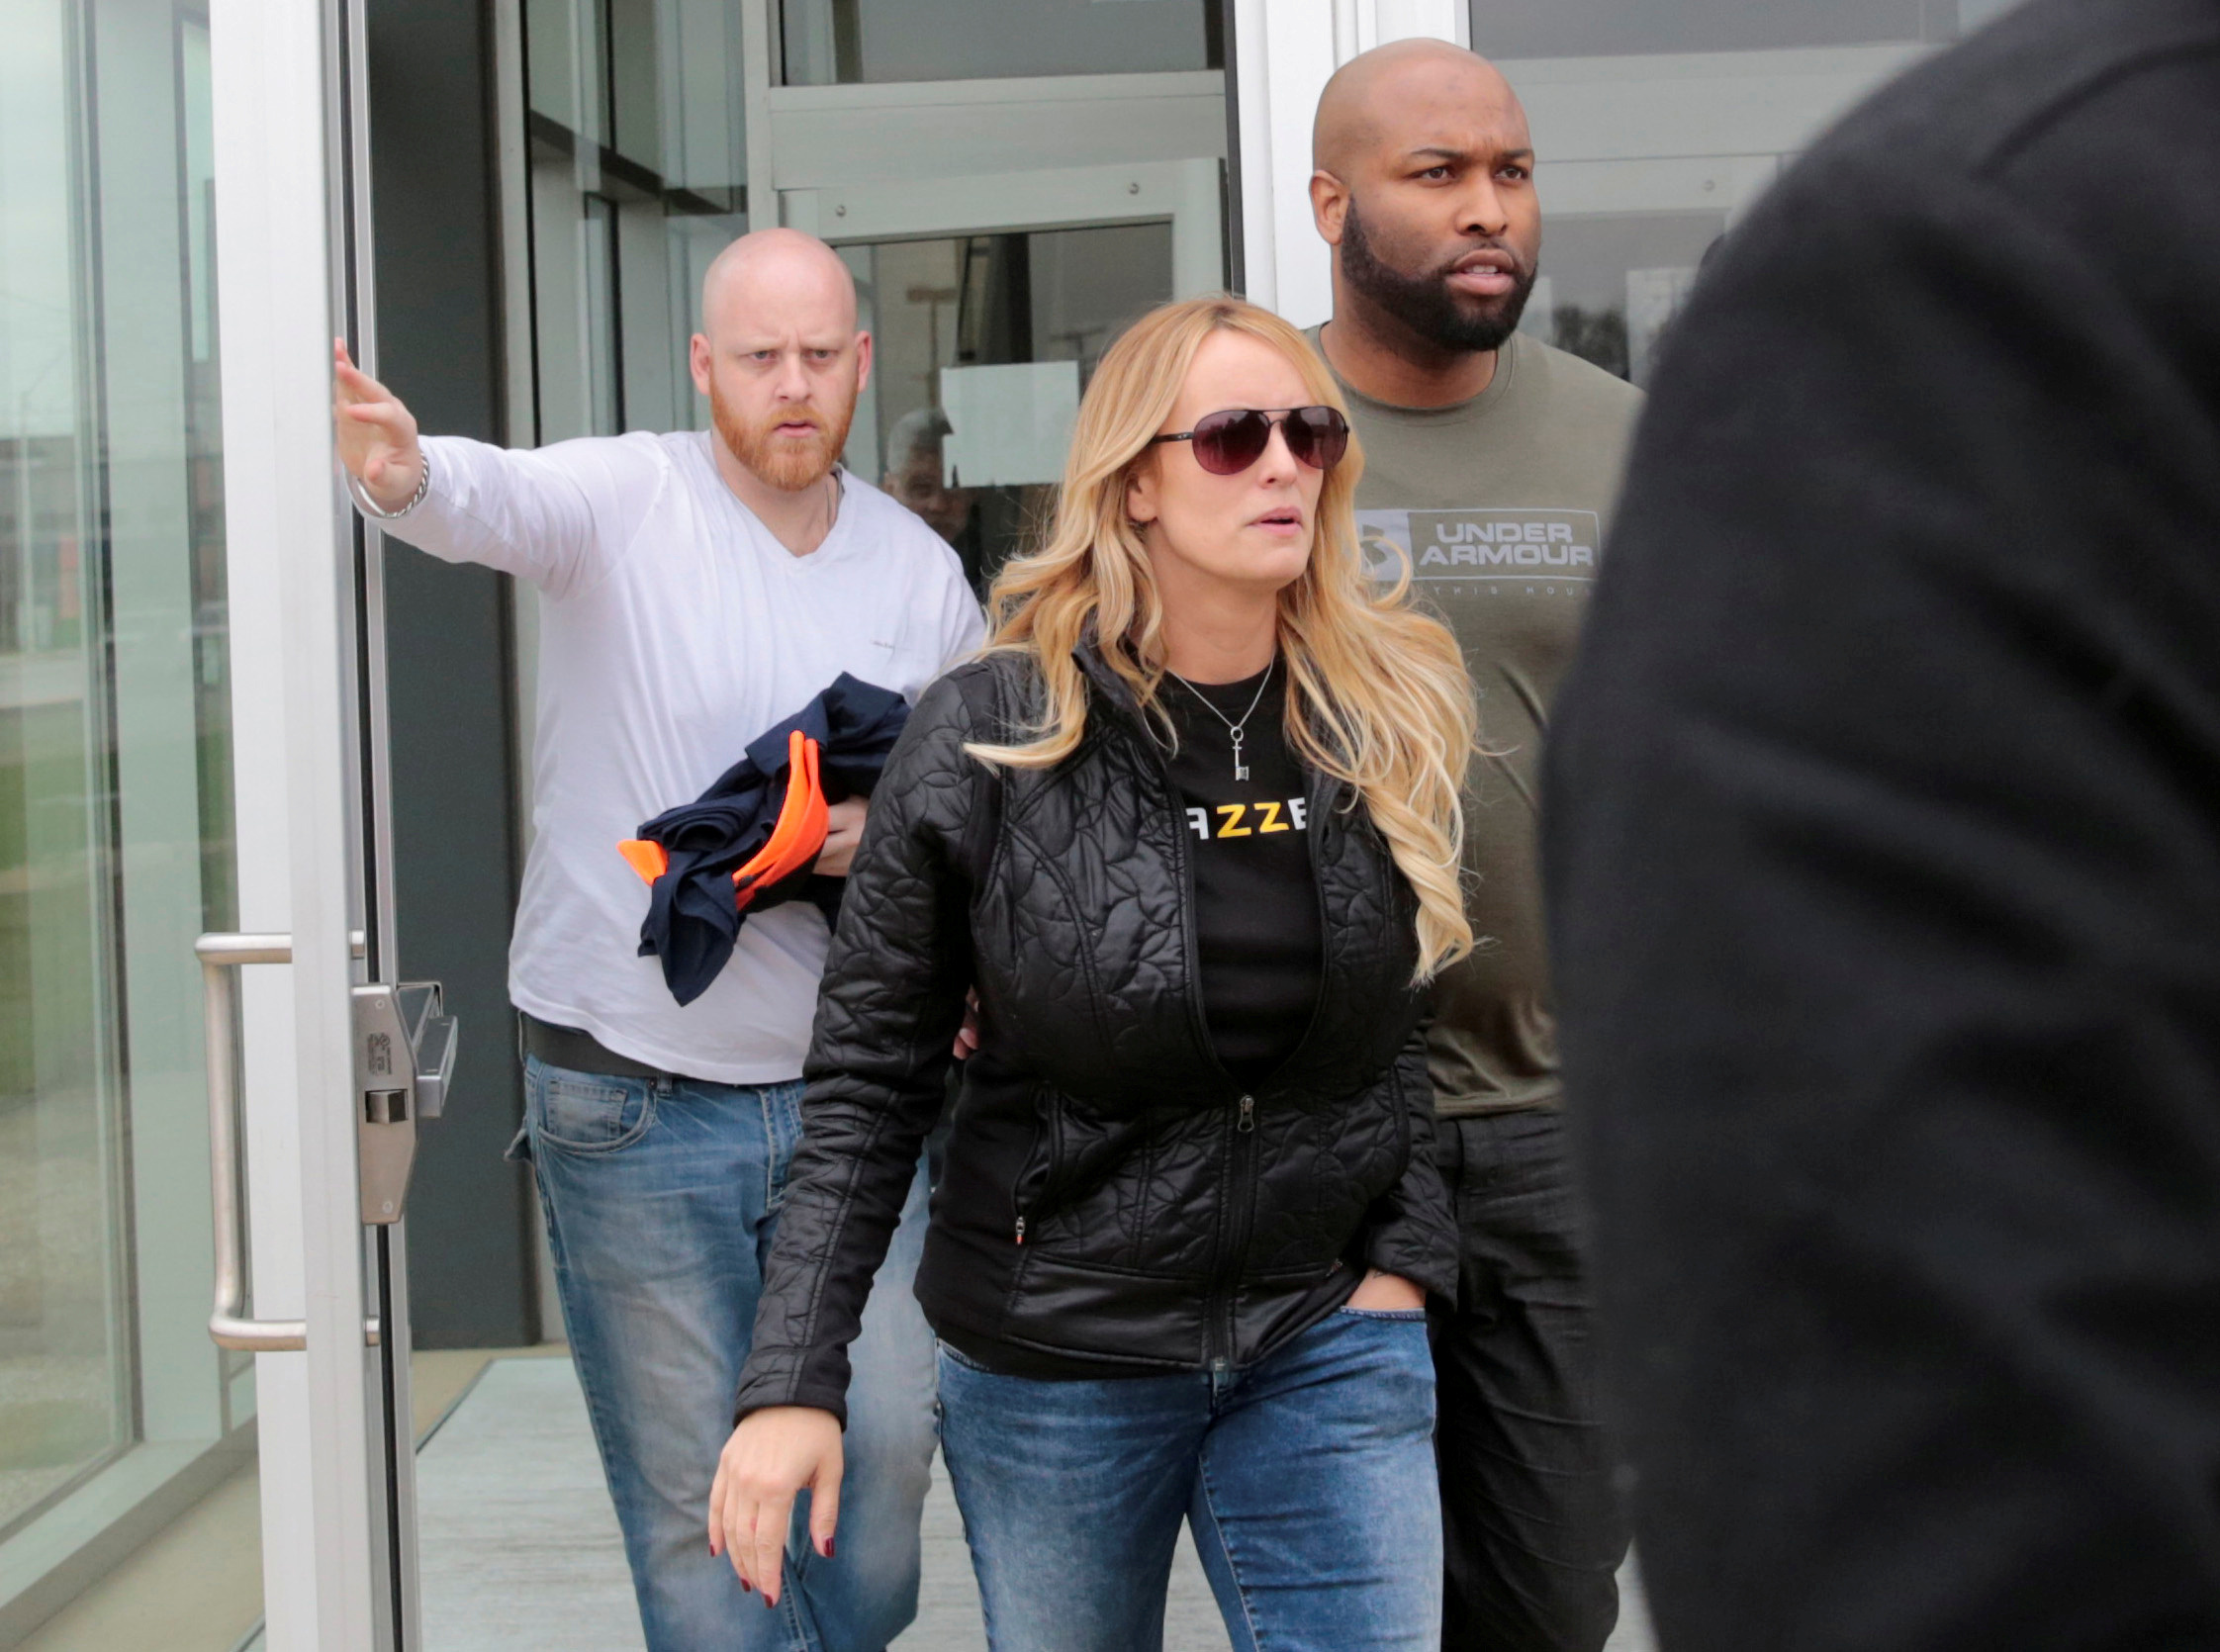 Adult film star Stormy Daniels and her security leave the Detroit Police Department 4th Precinct after picking up her temporary Dance Permit license to perform at a club in Detroit